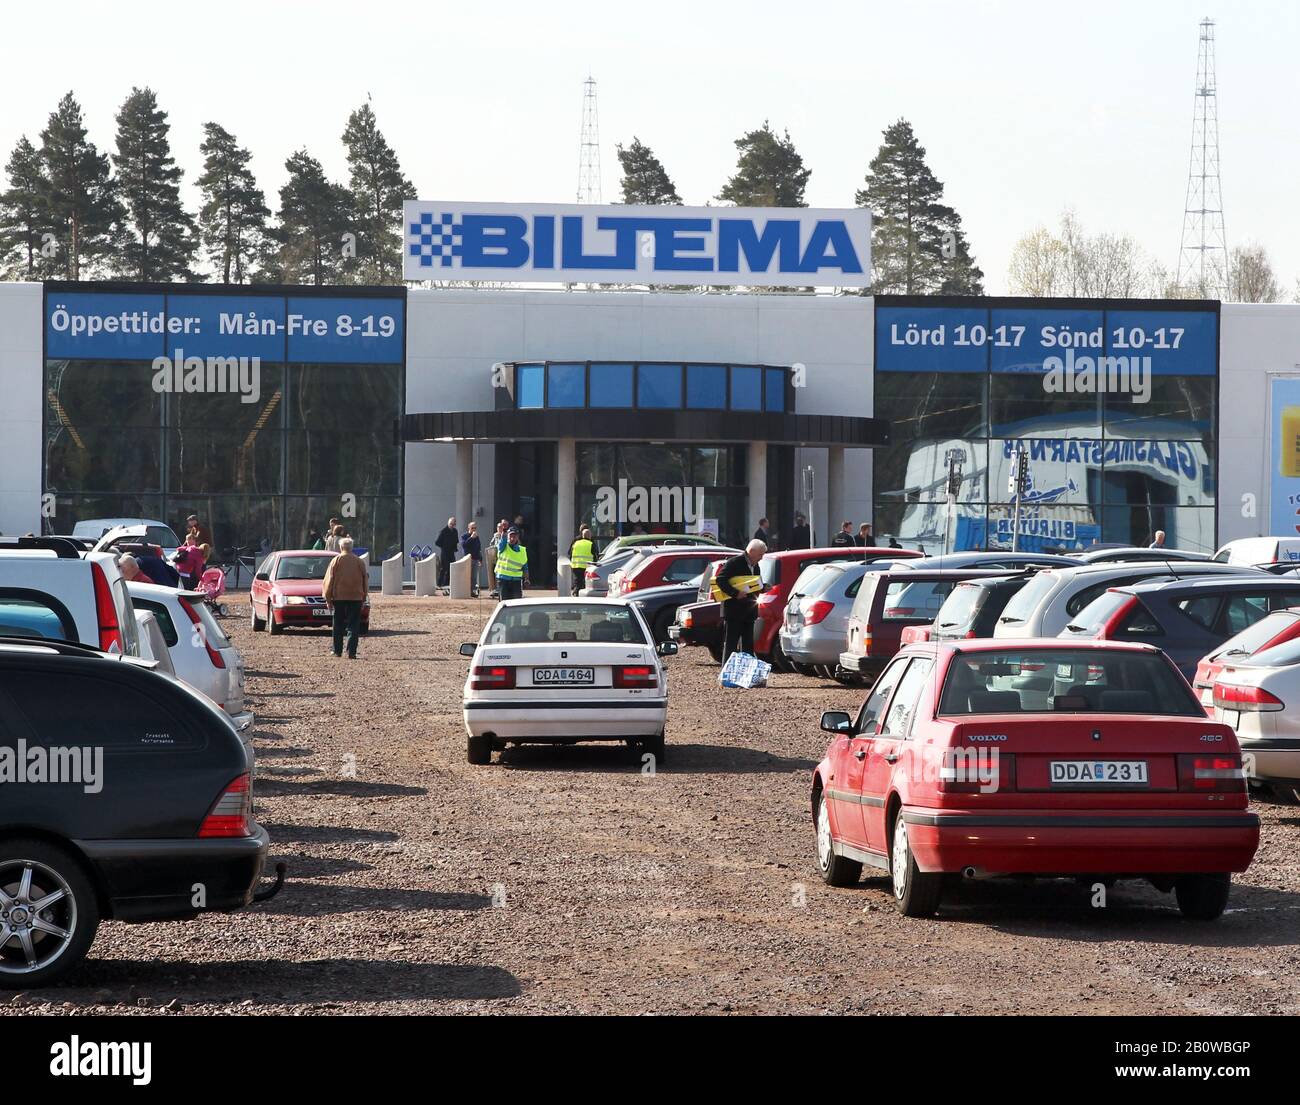 Opening of new Biltema store. Biltema is a Swedish chain of  restaurants/retail stores, specialising in